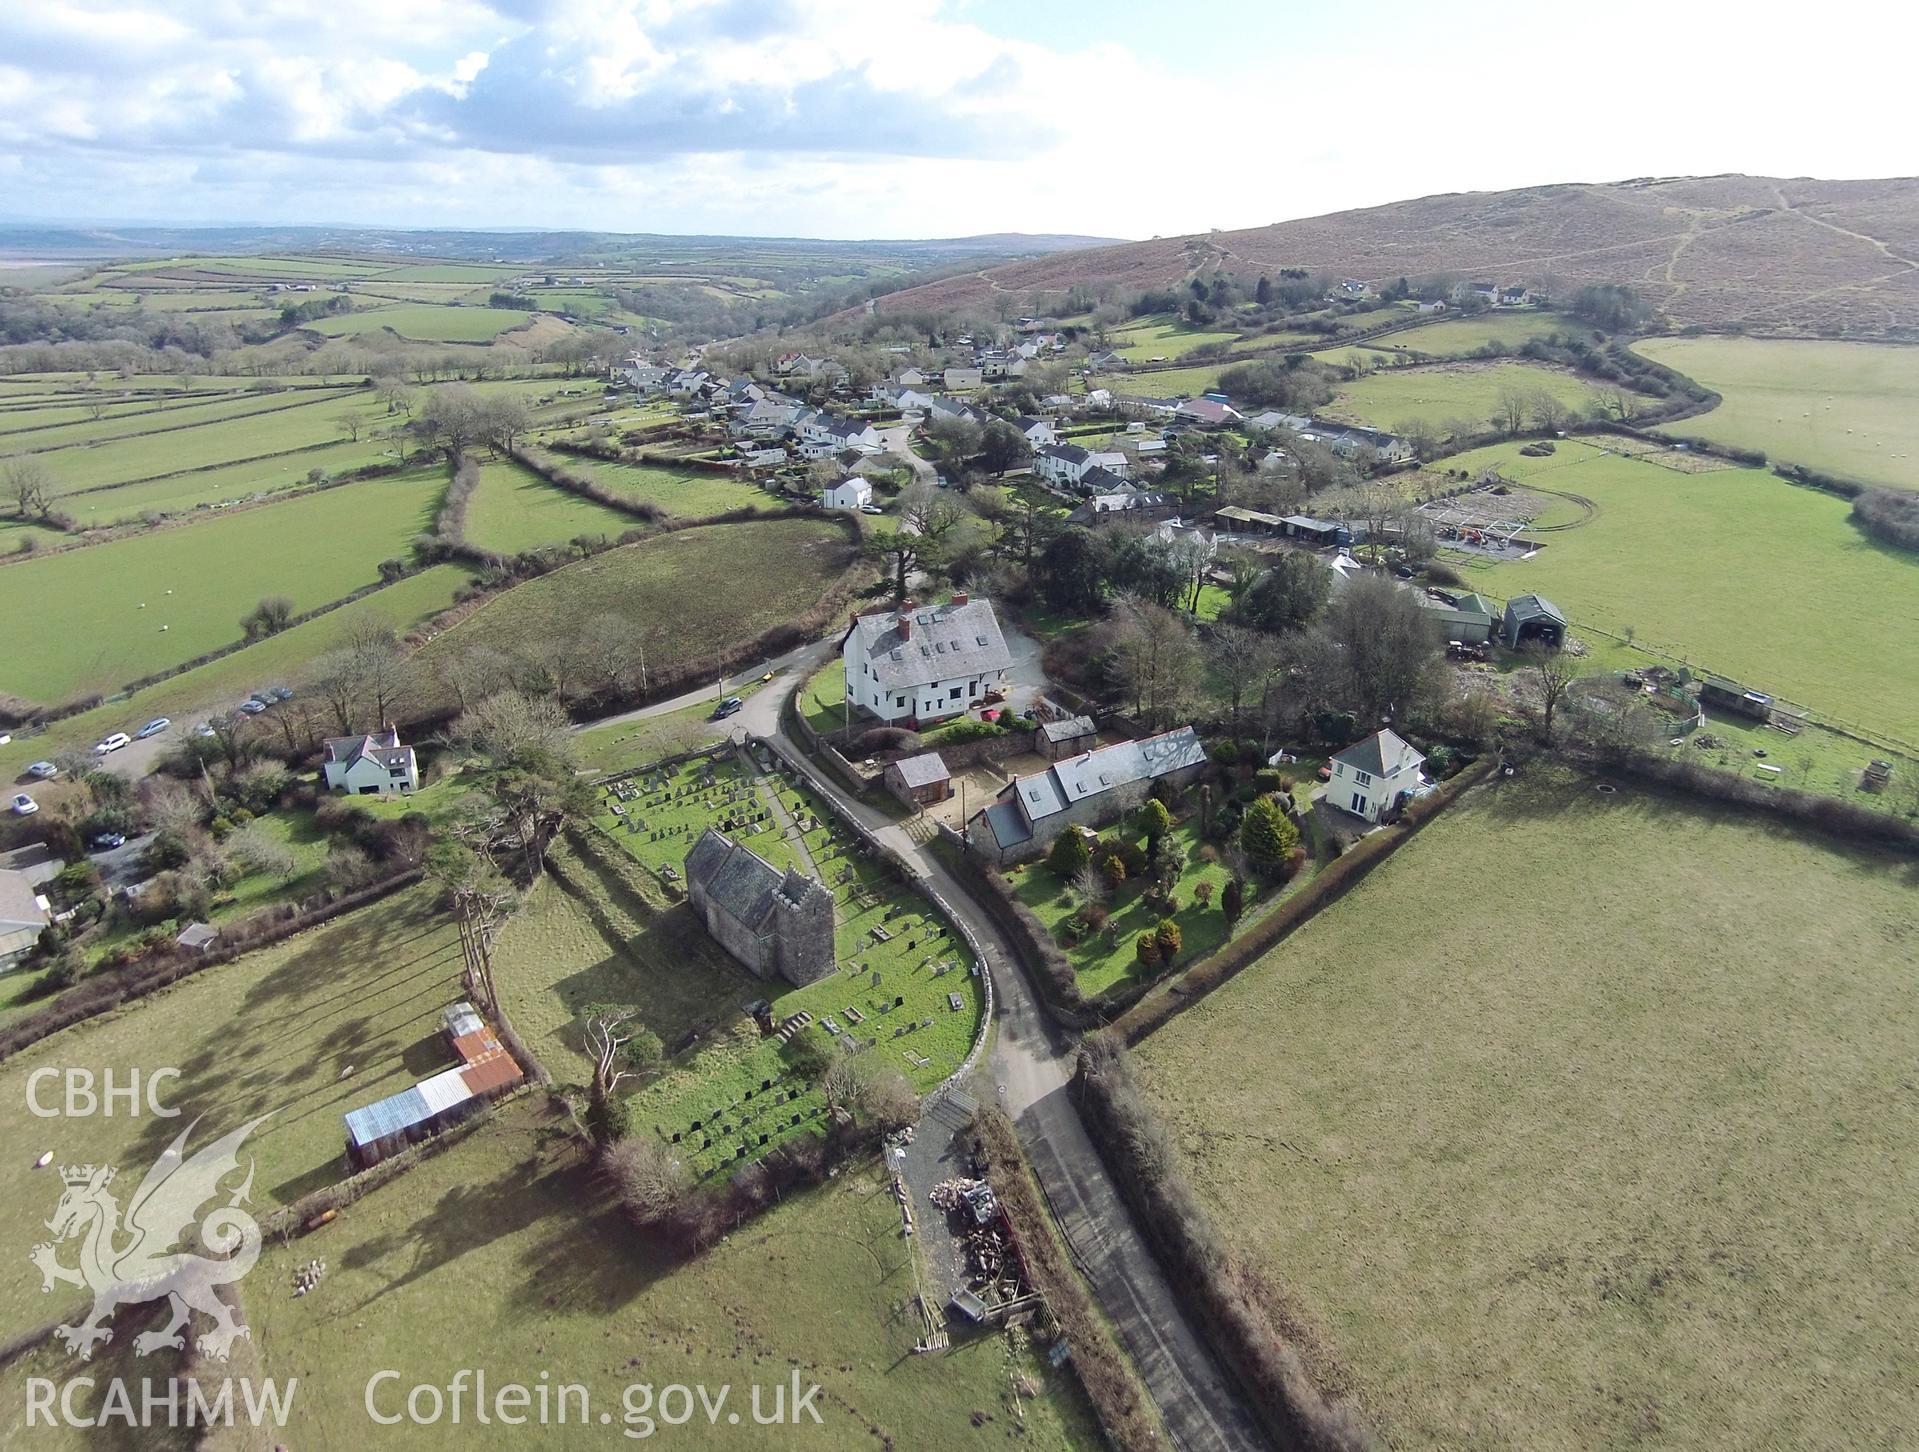 Colour aerial photo showing Llanmadoc, taken by Paul R. Davis,  5th March 2016.